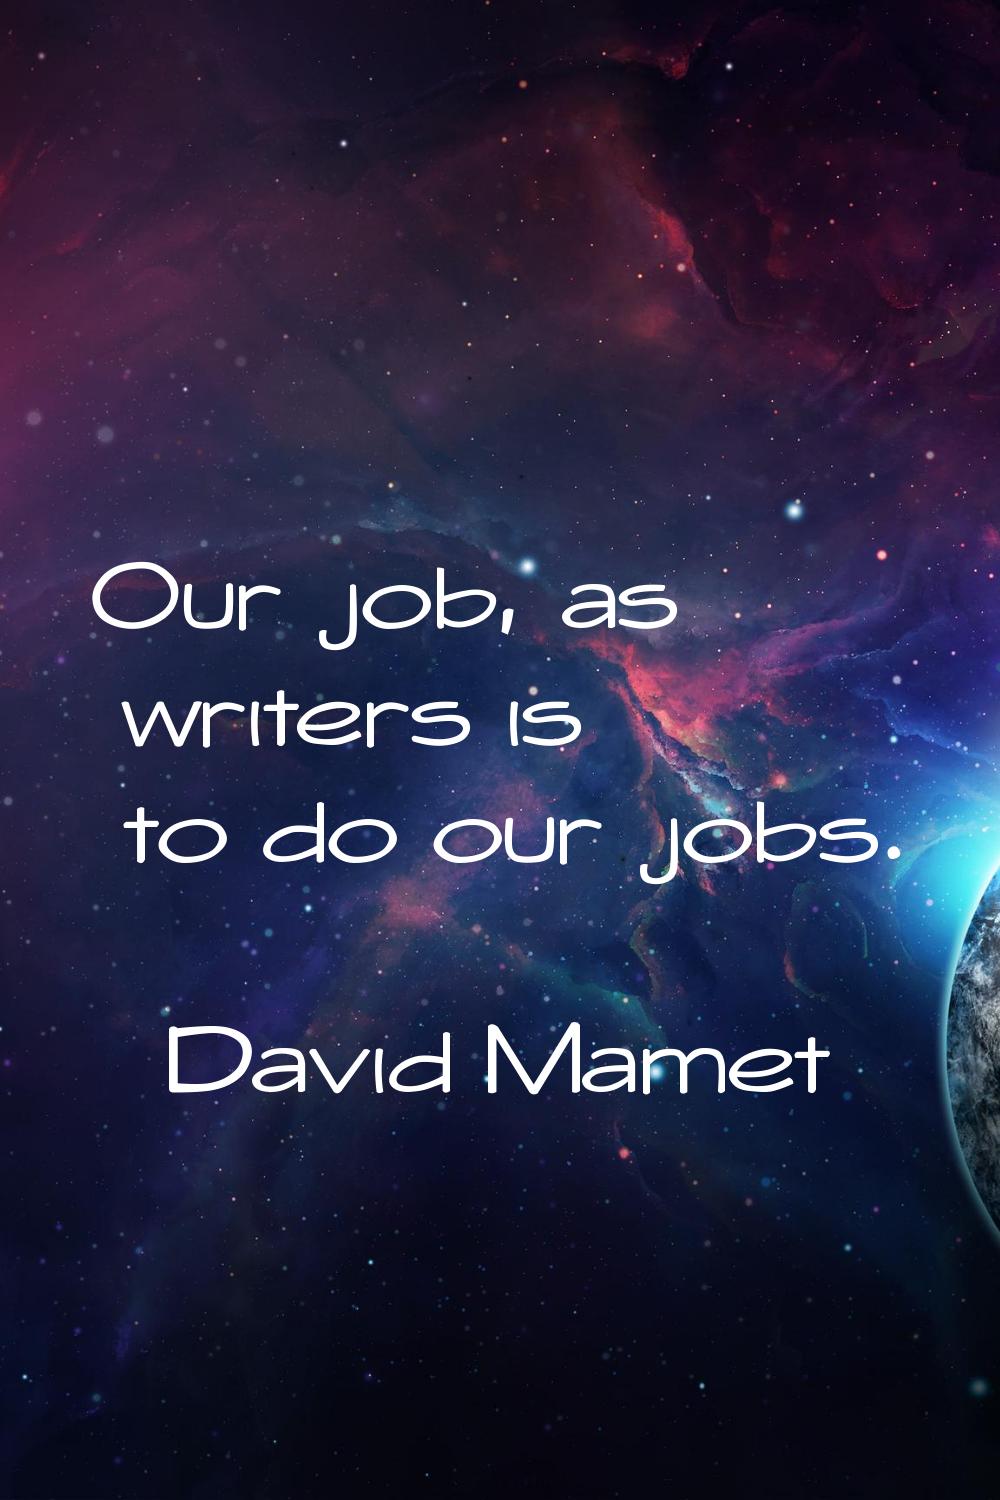 Our job, as writers is to do our jobs.